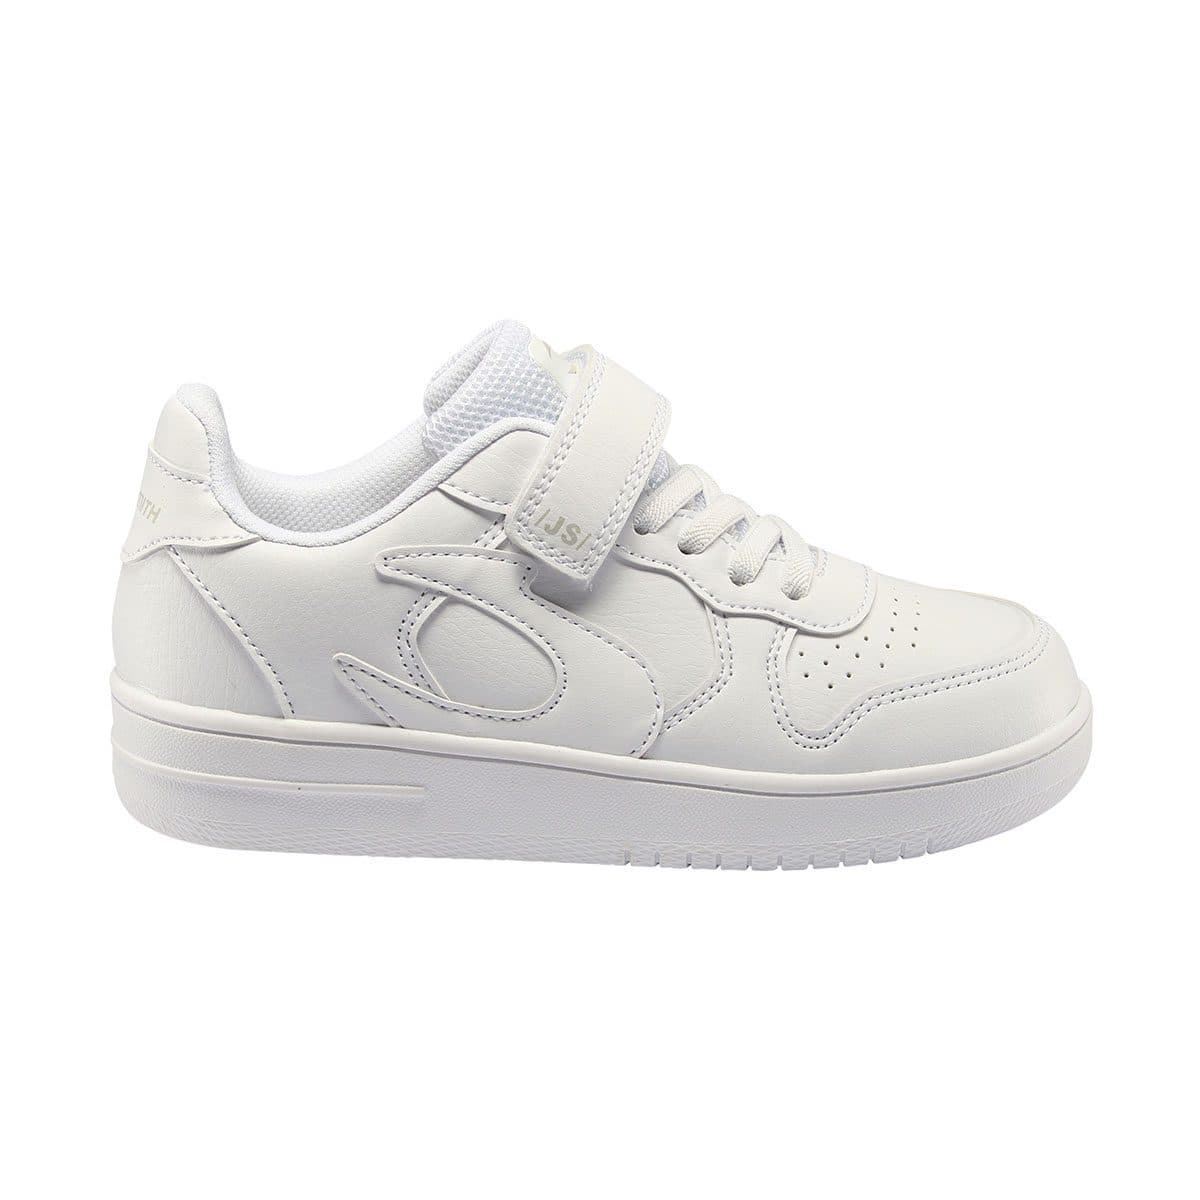 Trainers - White - Kids | H&M IN